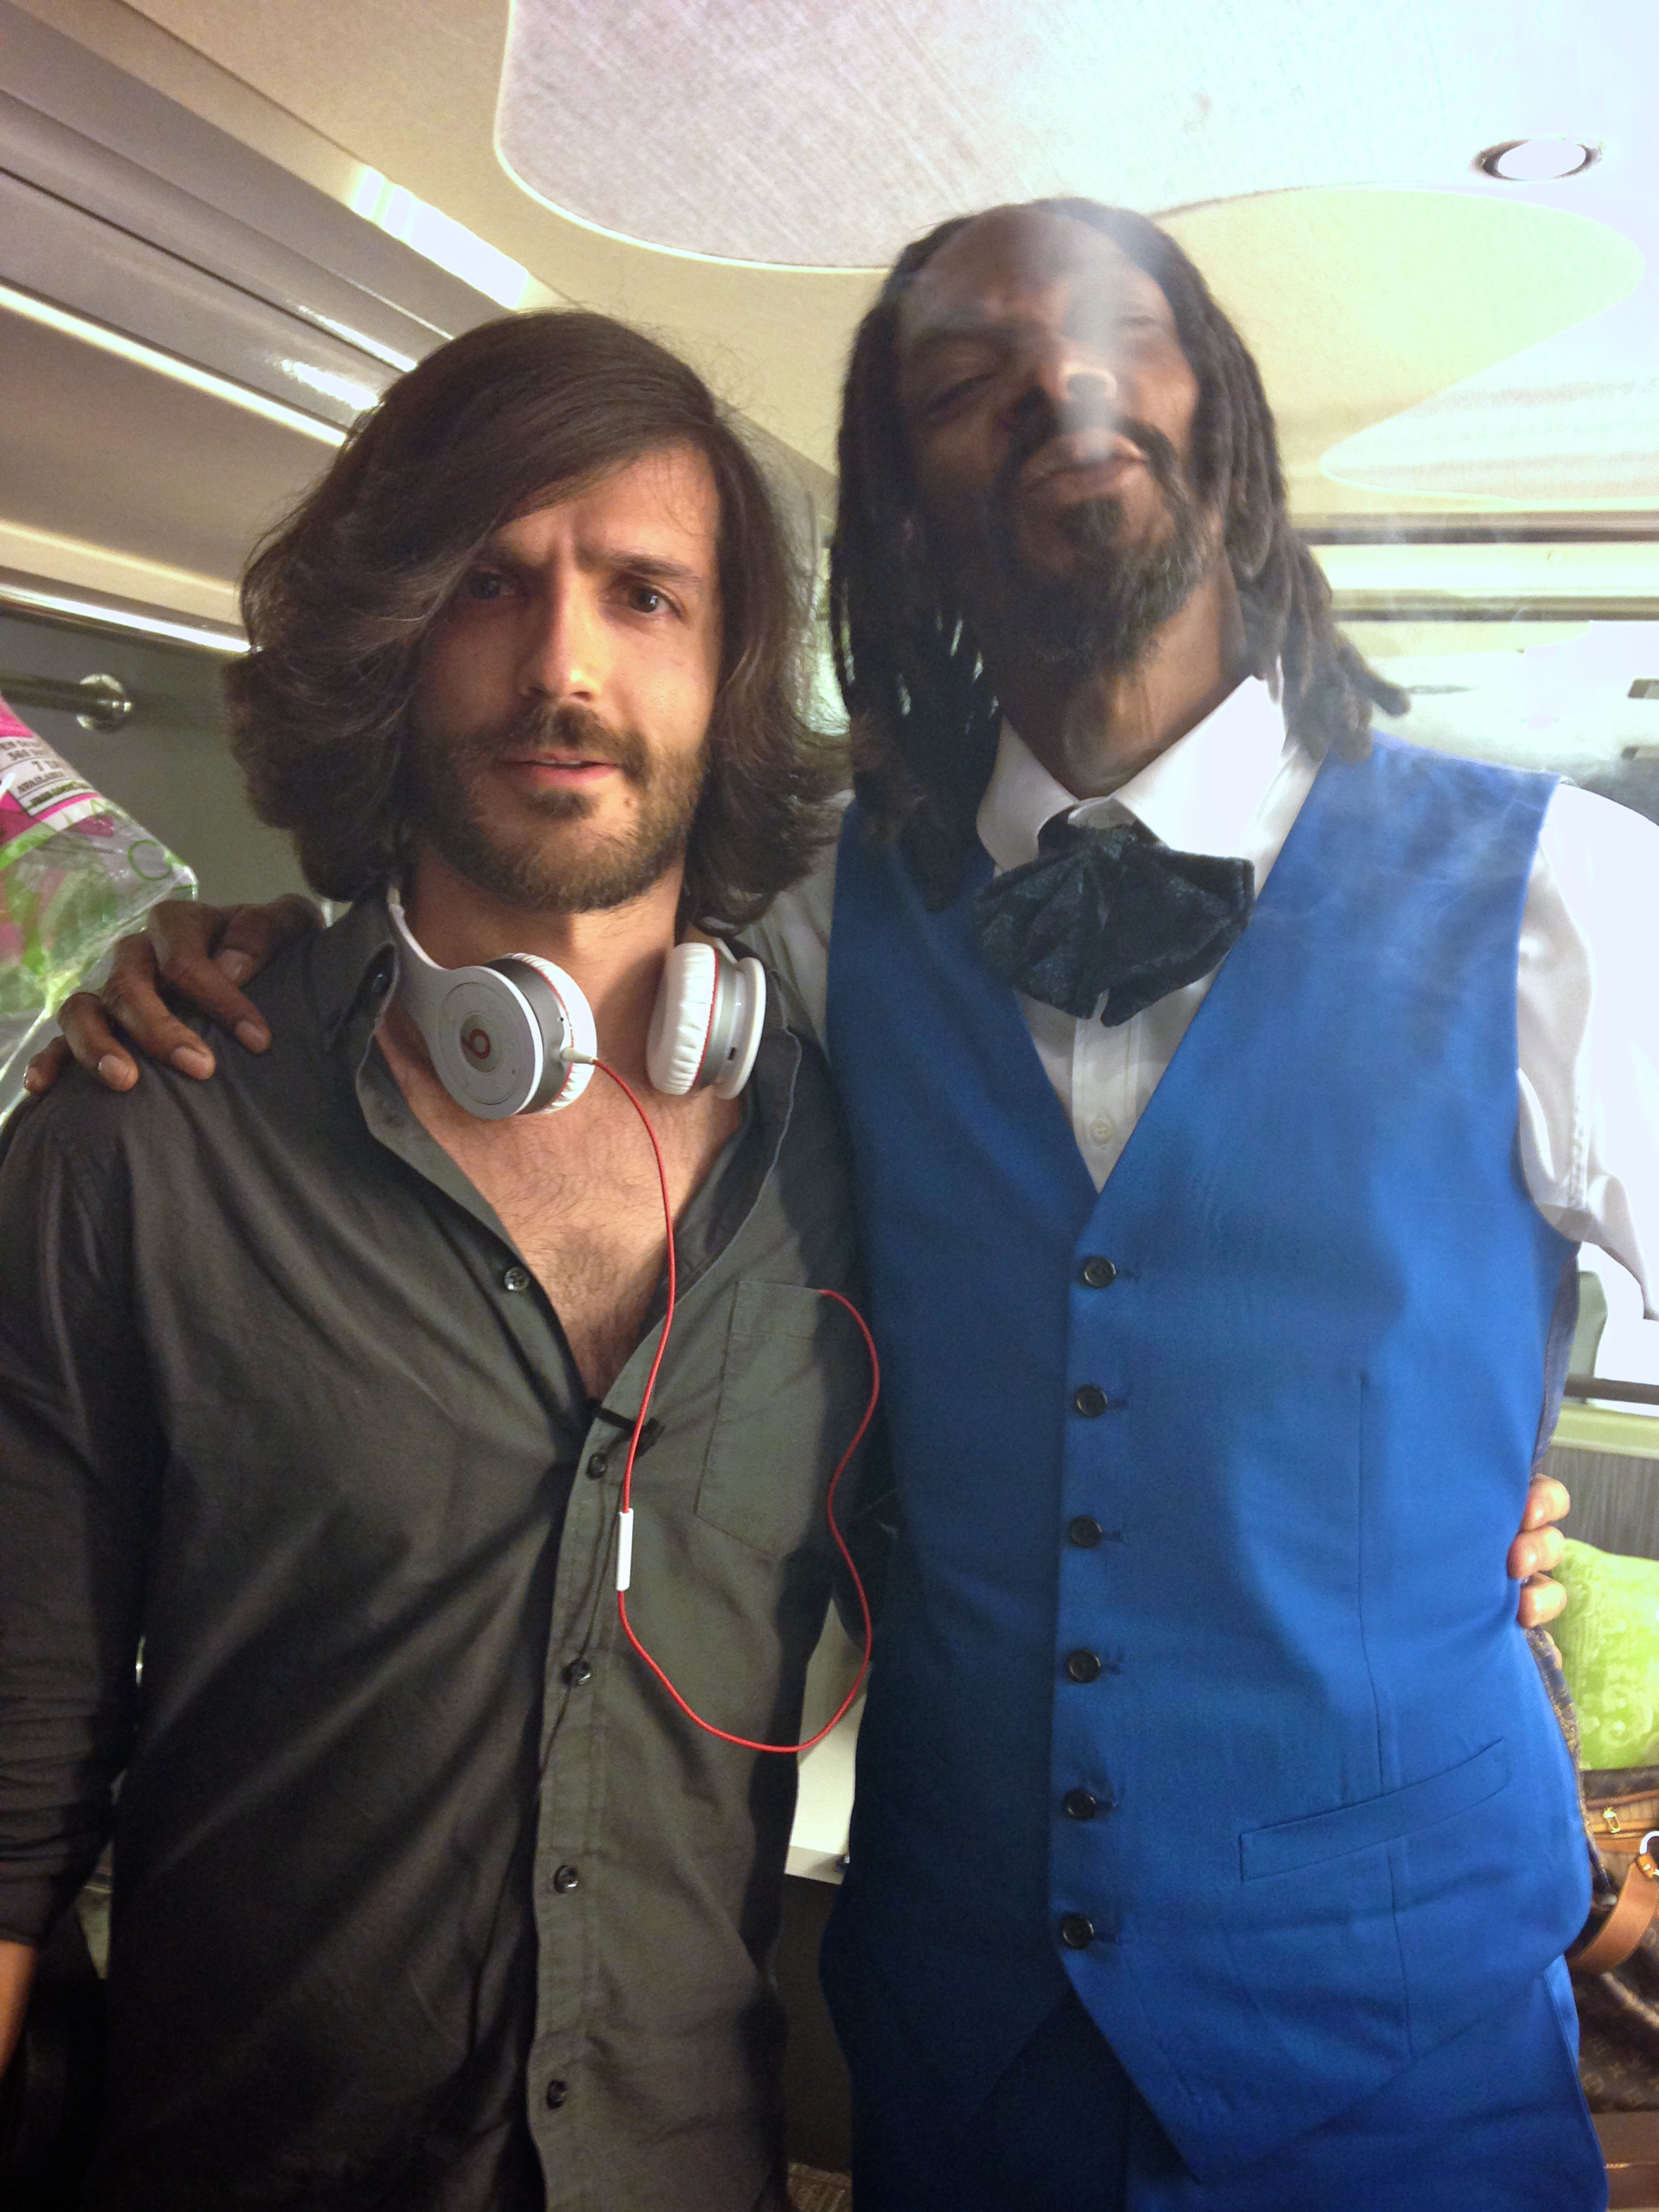 filming with Snoop Dogg